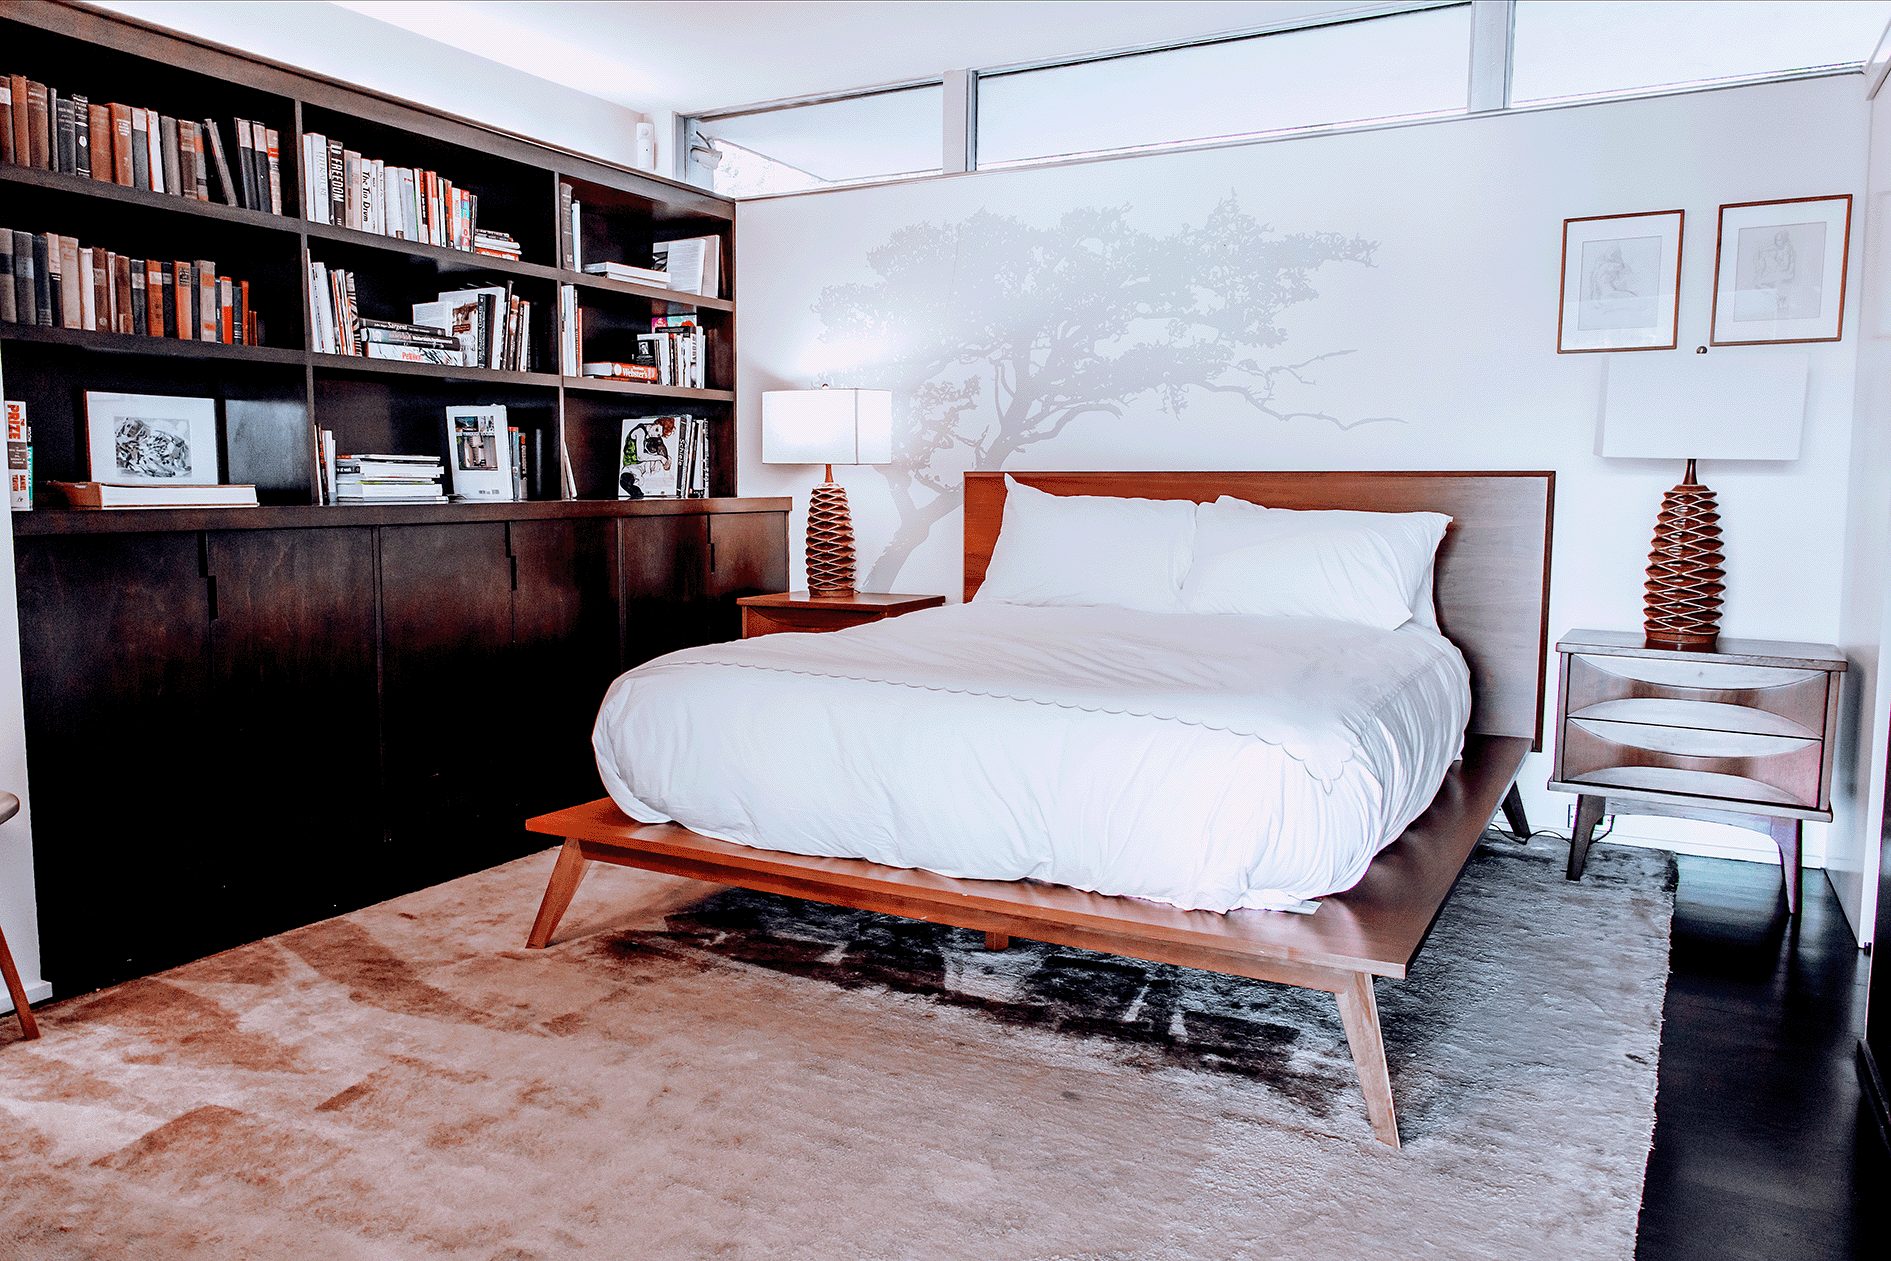 A bed with white sheets and pillows in a bedroom.